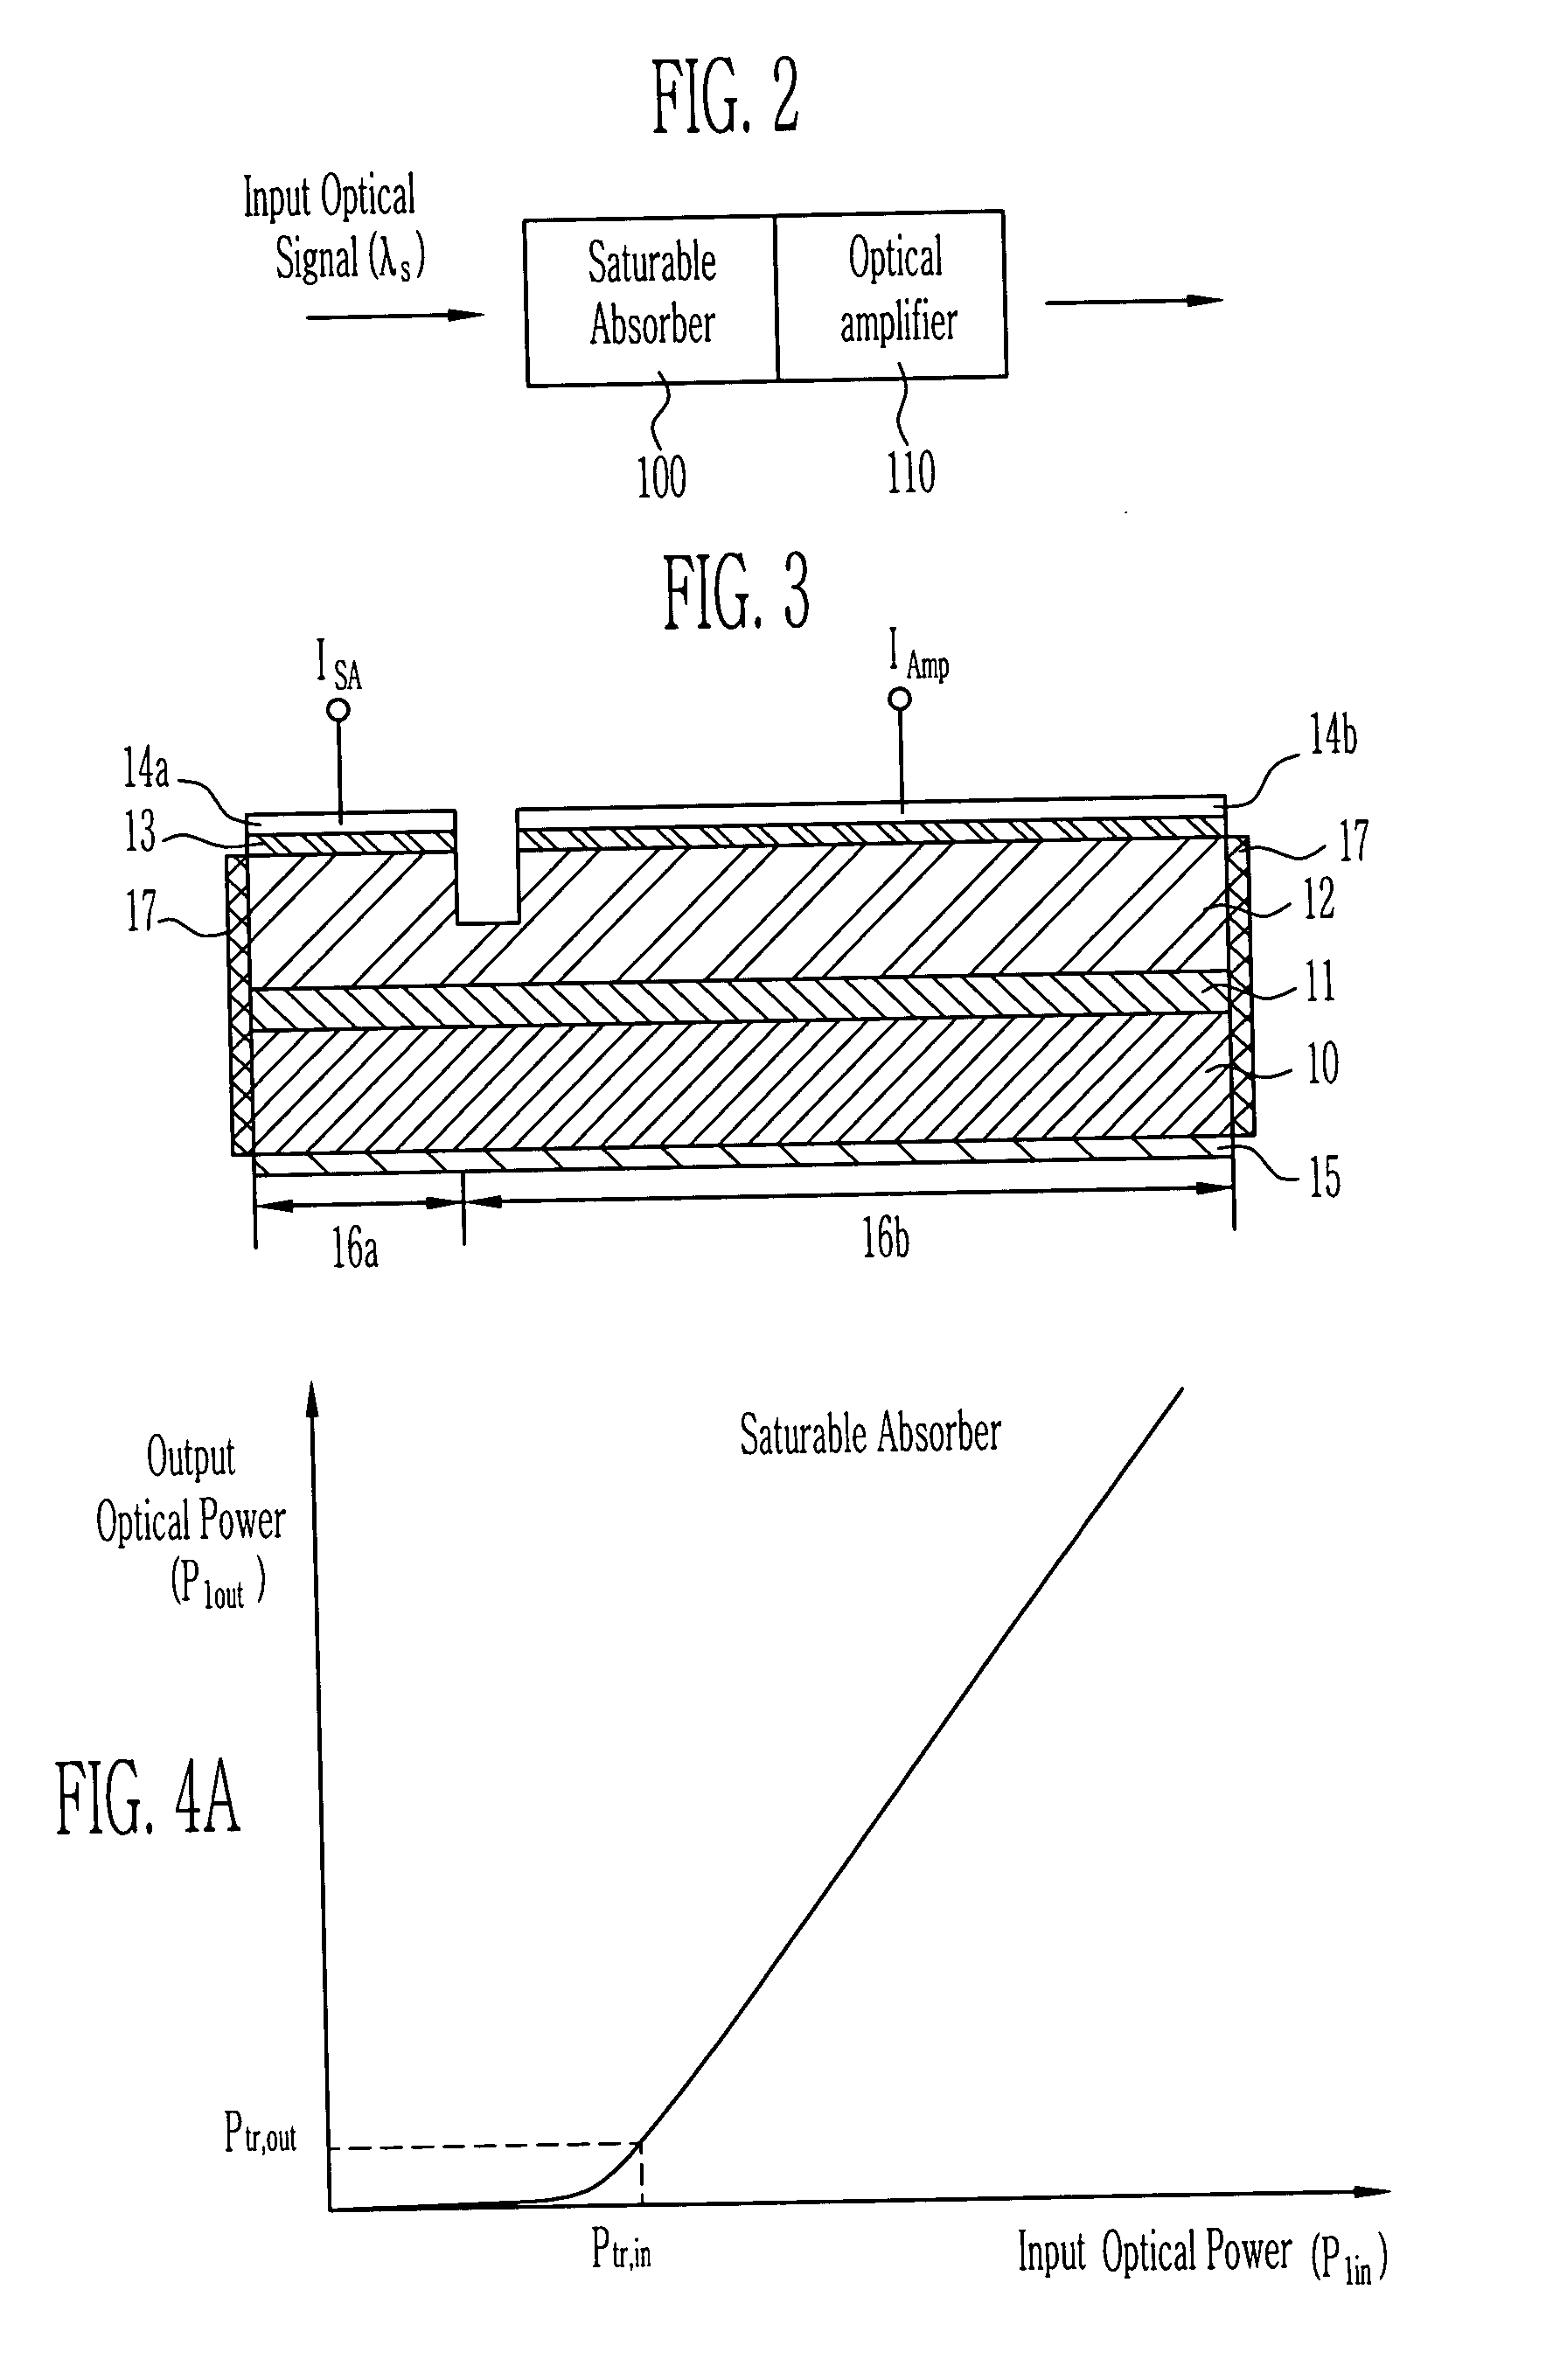 Optical signal processing element using saturable absorber and optical amplifier